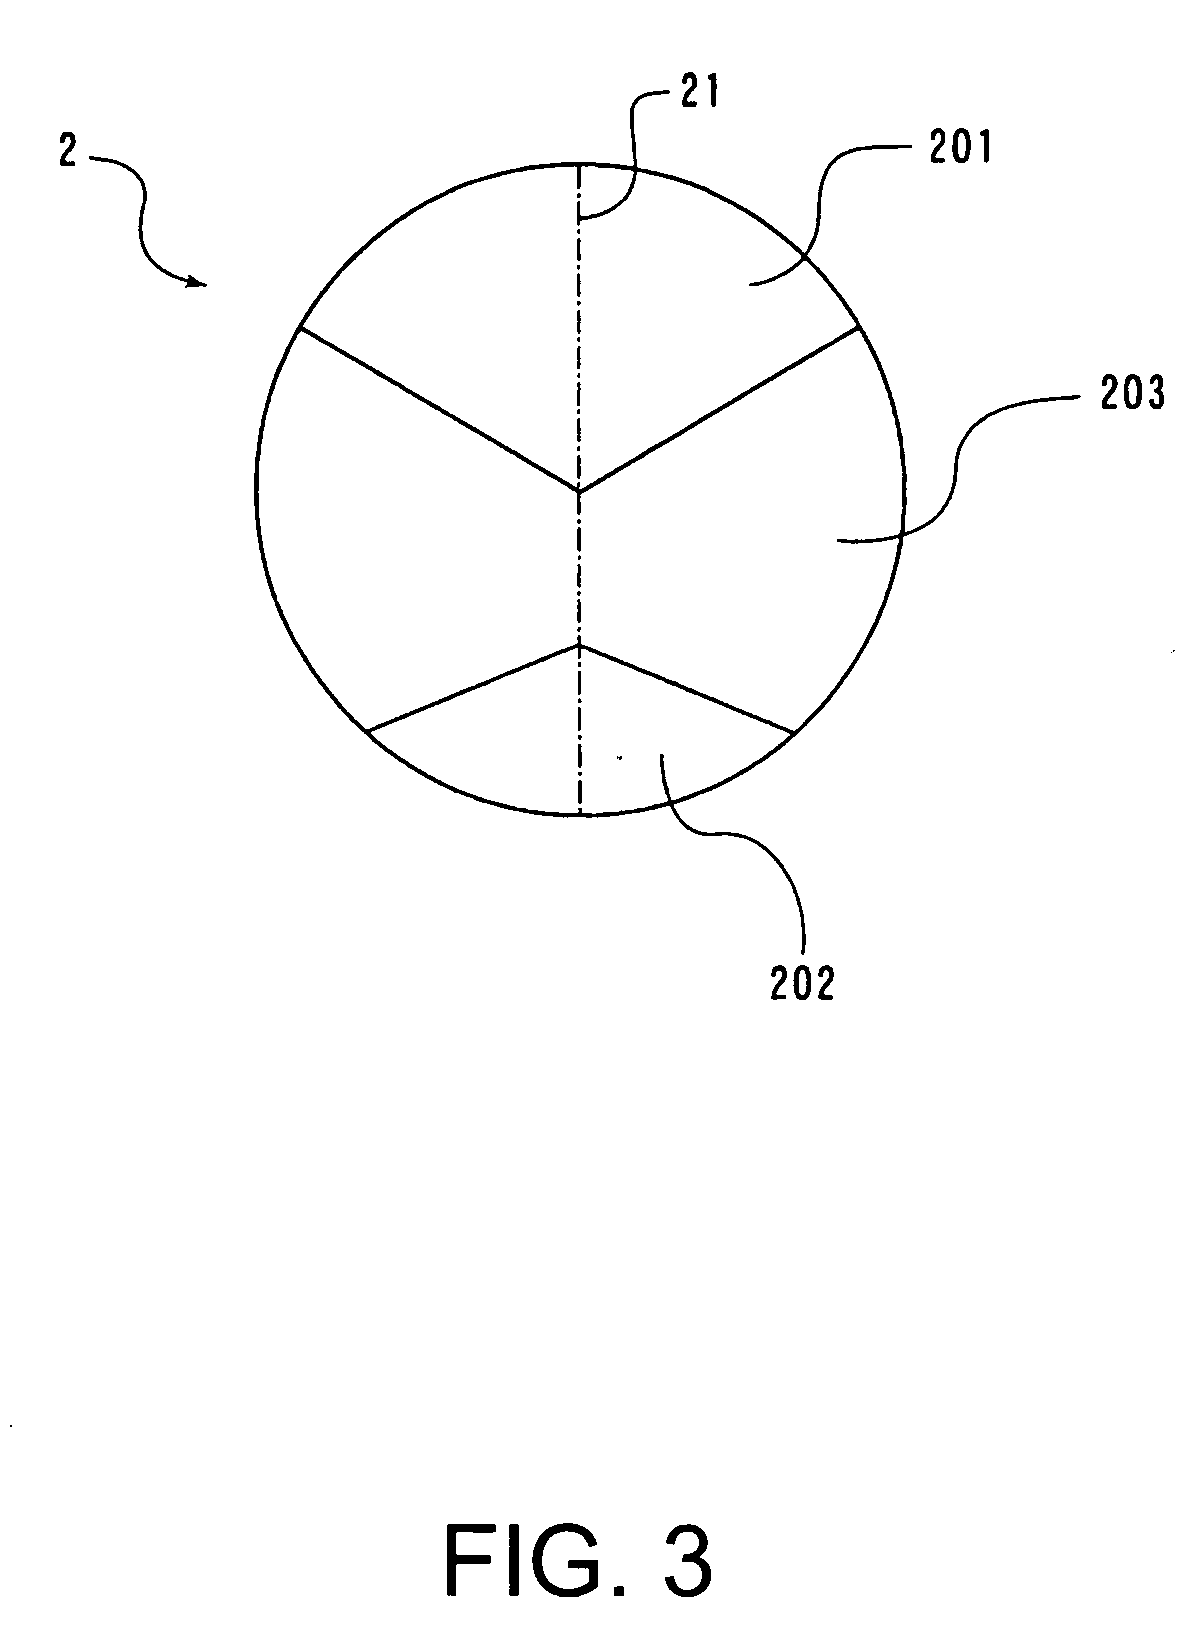 Combined spectacle lens, auxiliary lens, and method of edging lenses